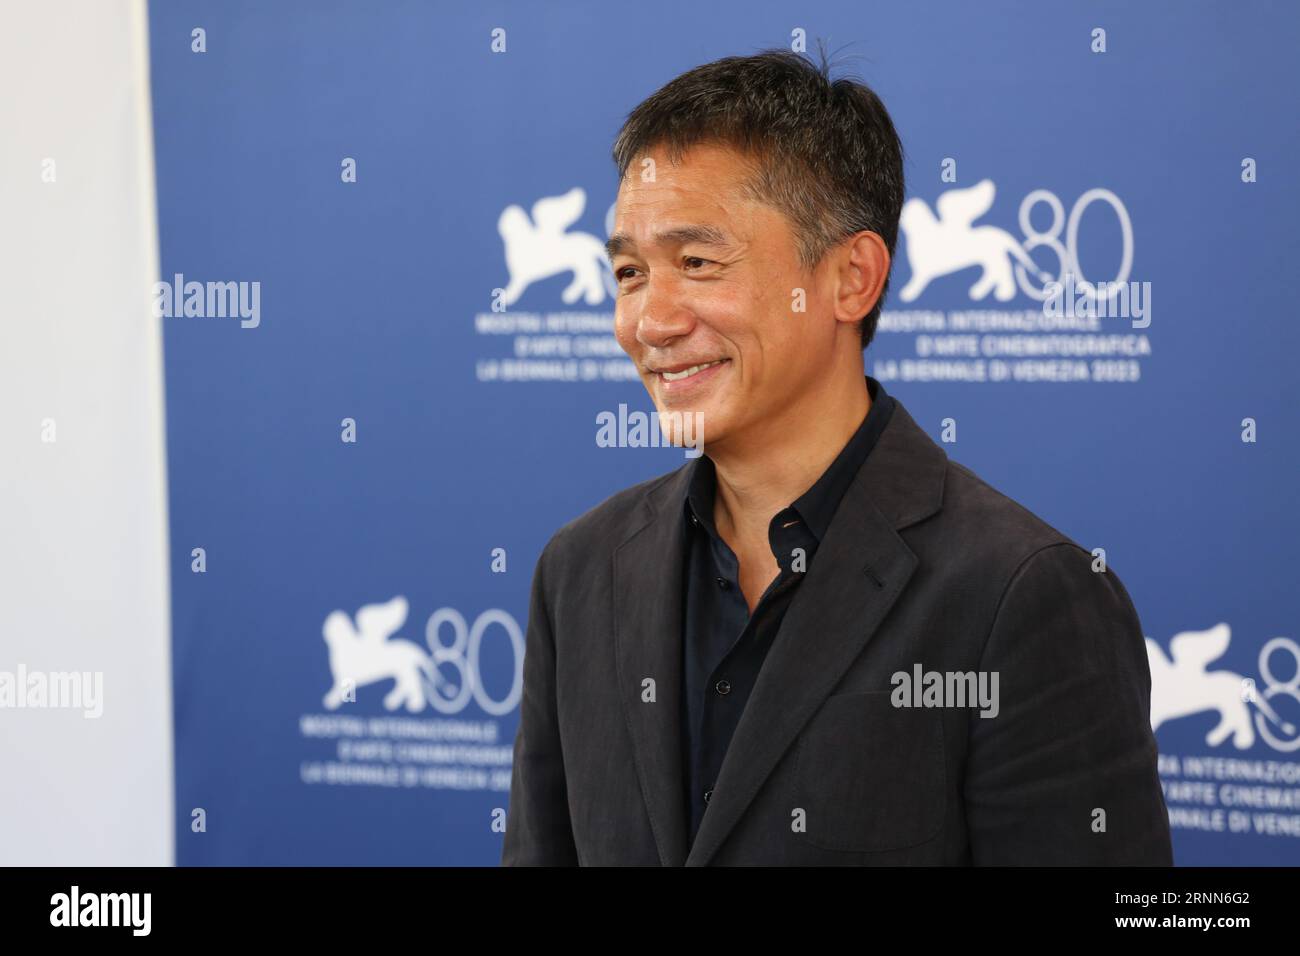 Venice, Italy, 2nd September, 2023. Photocall for Tony Leung Chiu-wai ahead of recieving the Golden Lion for Lifetime Achievement 2023 at the 80th Venice International Film Festival. Photo Credit: Doreen Kennedy / Alamy Live News. Stock Photo